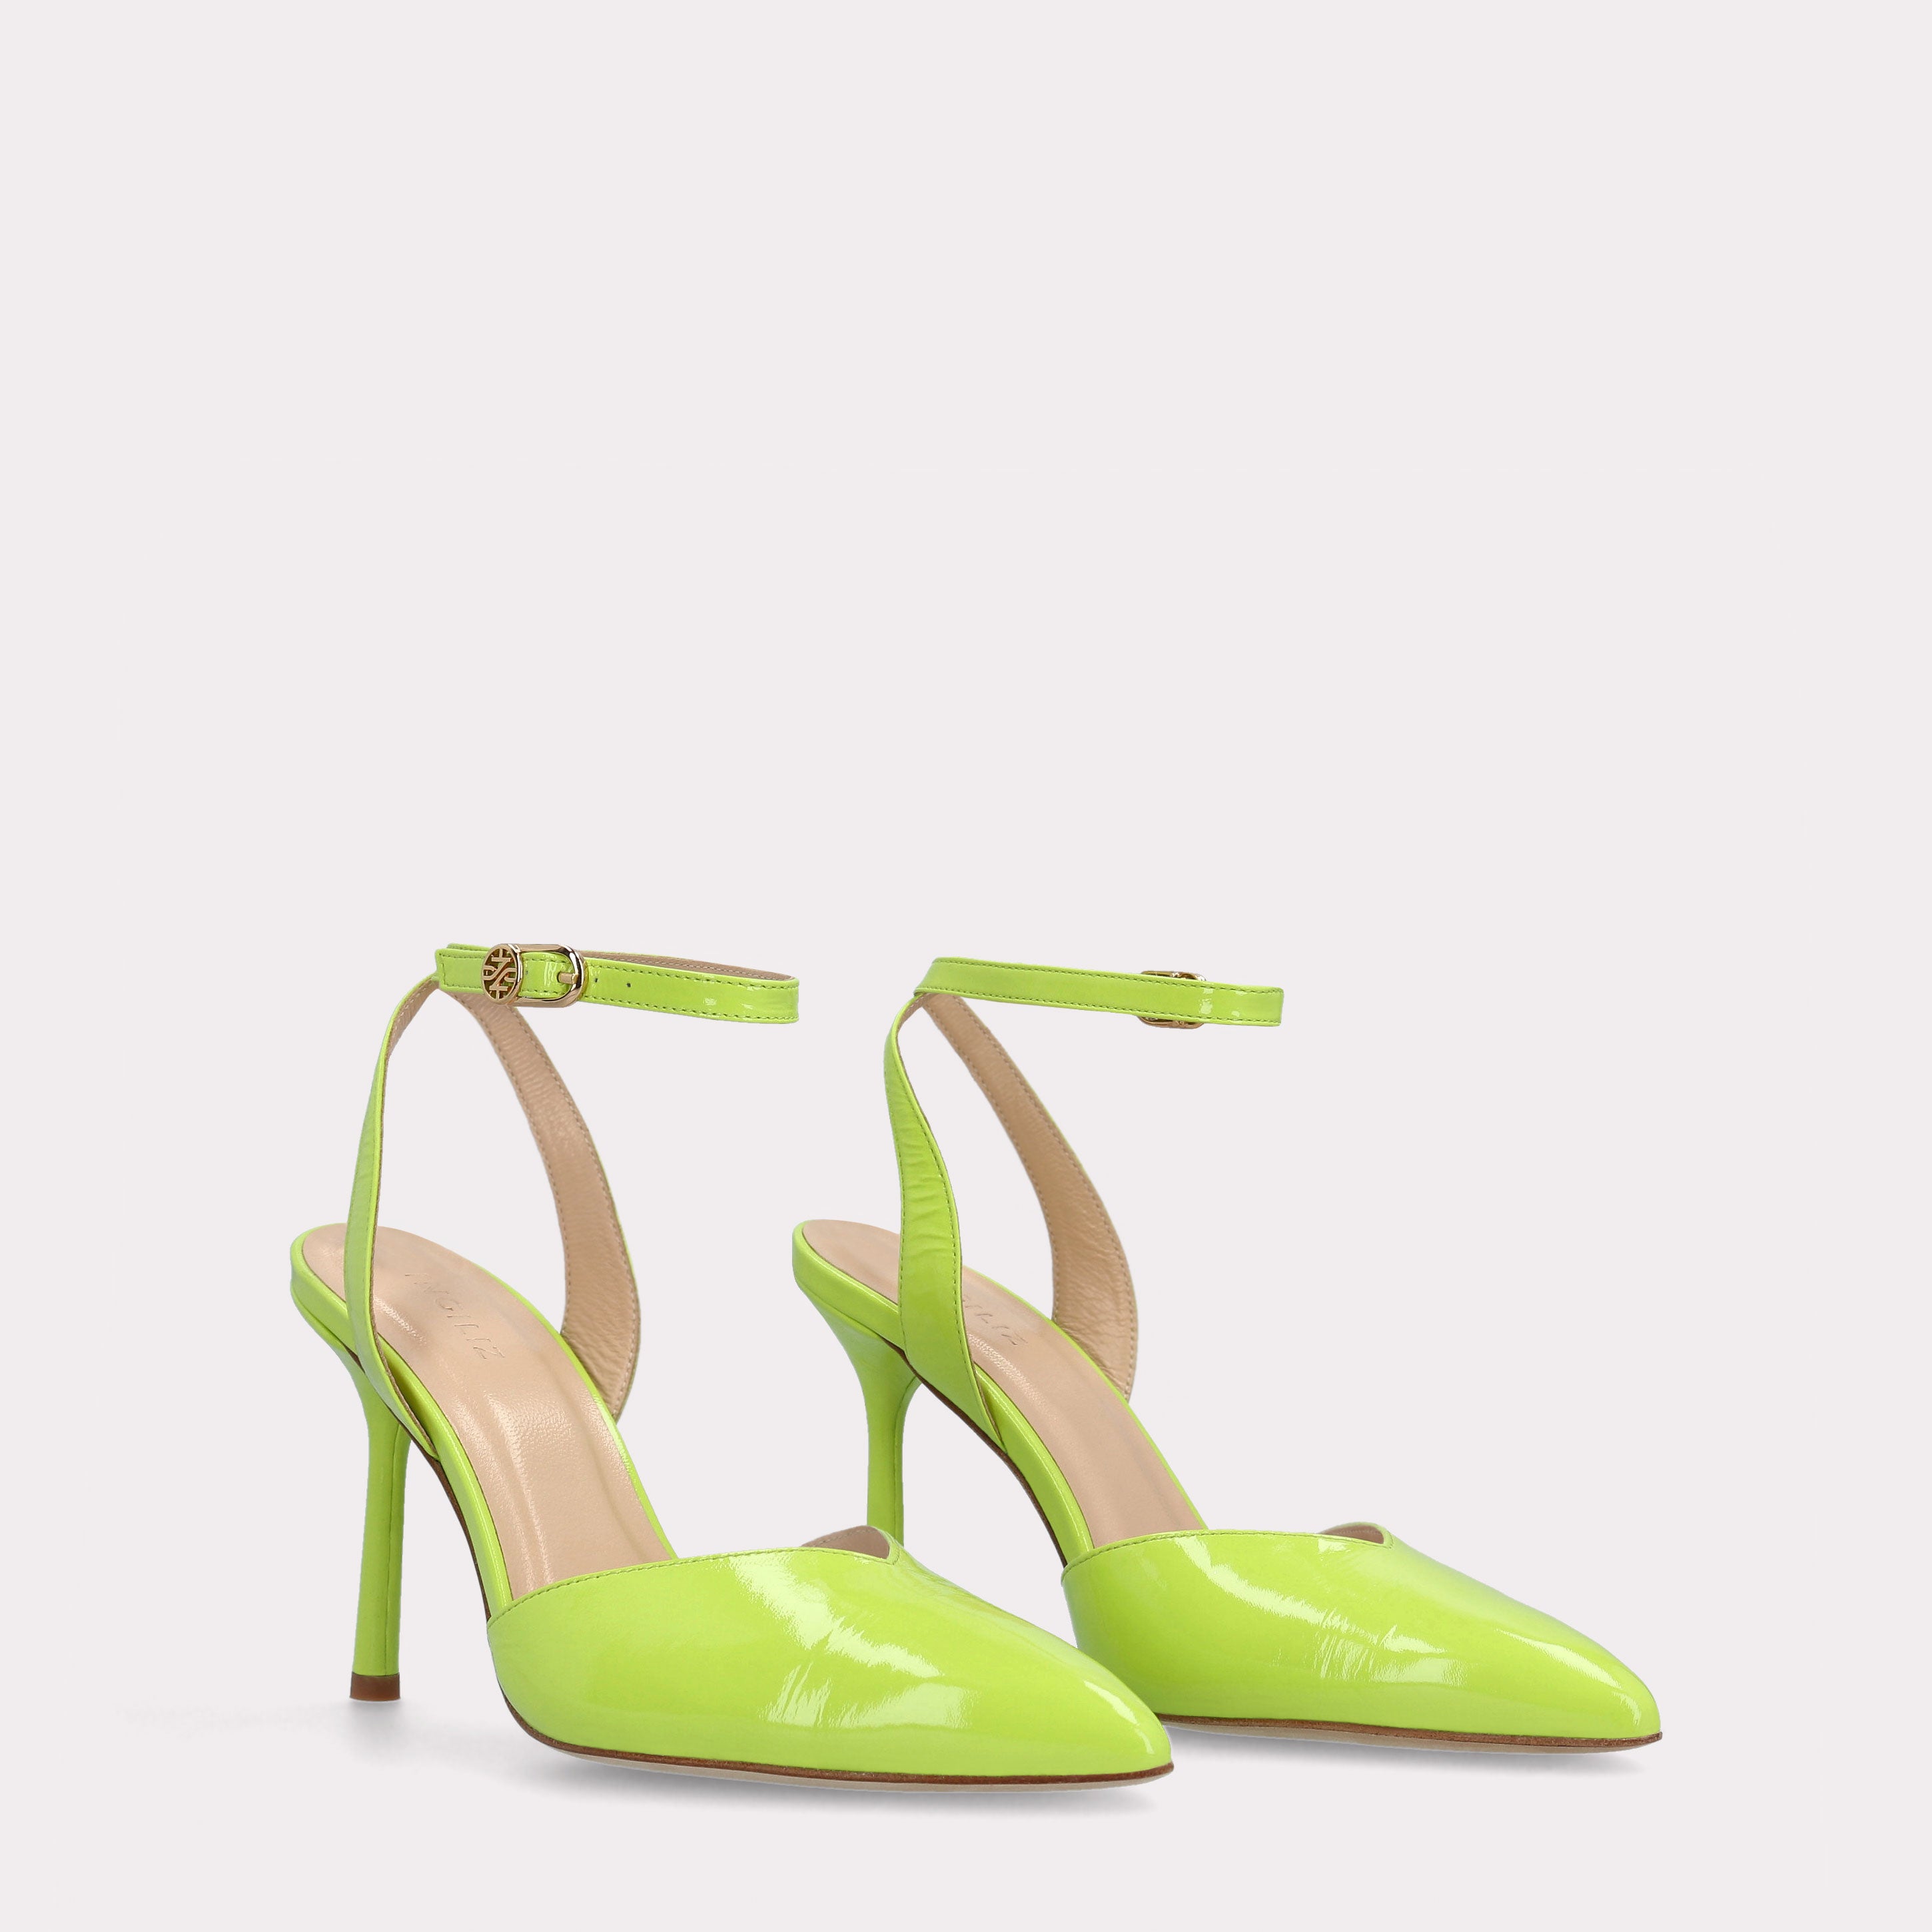 ABA 13 POISON GREEN LEATHER PUMPS